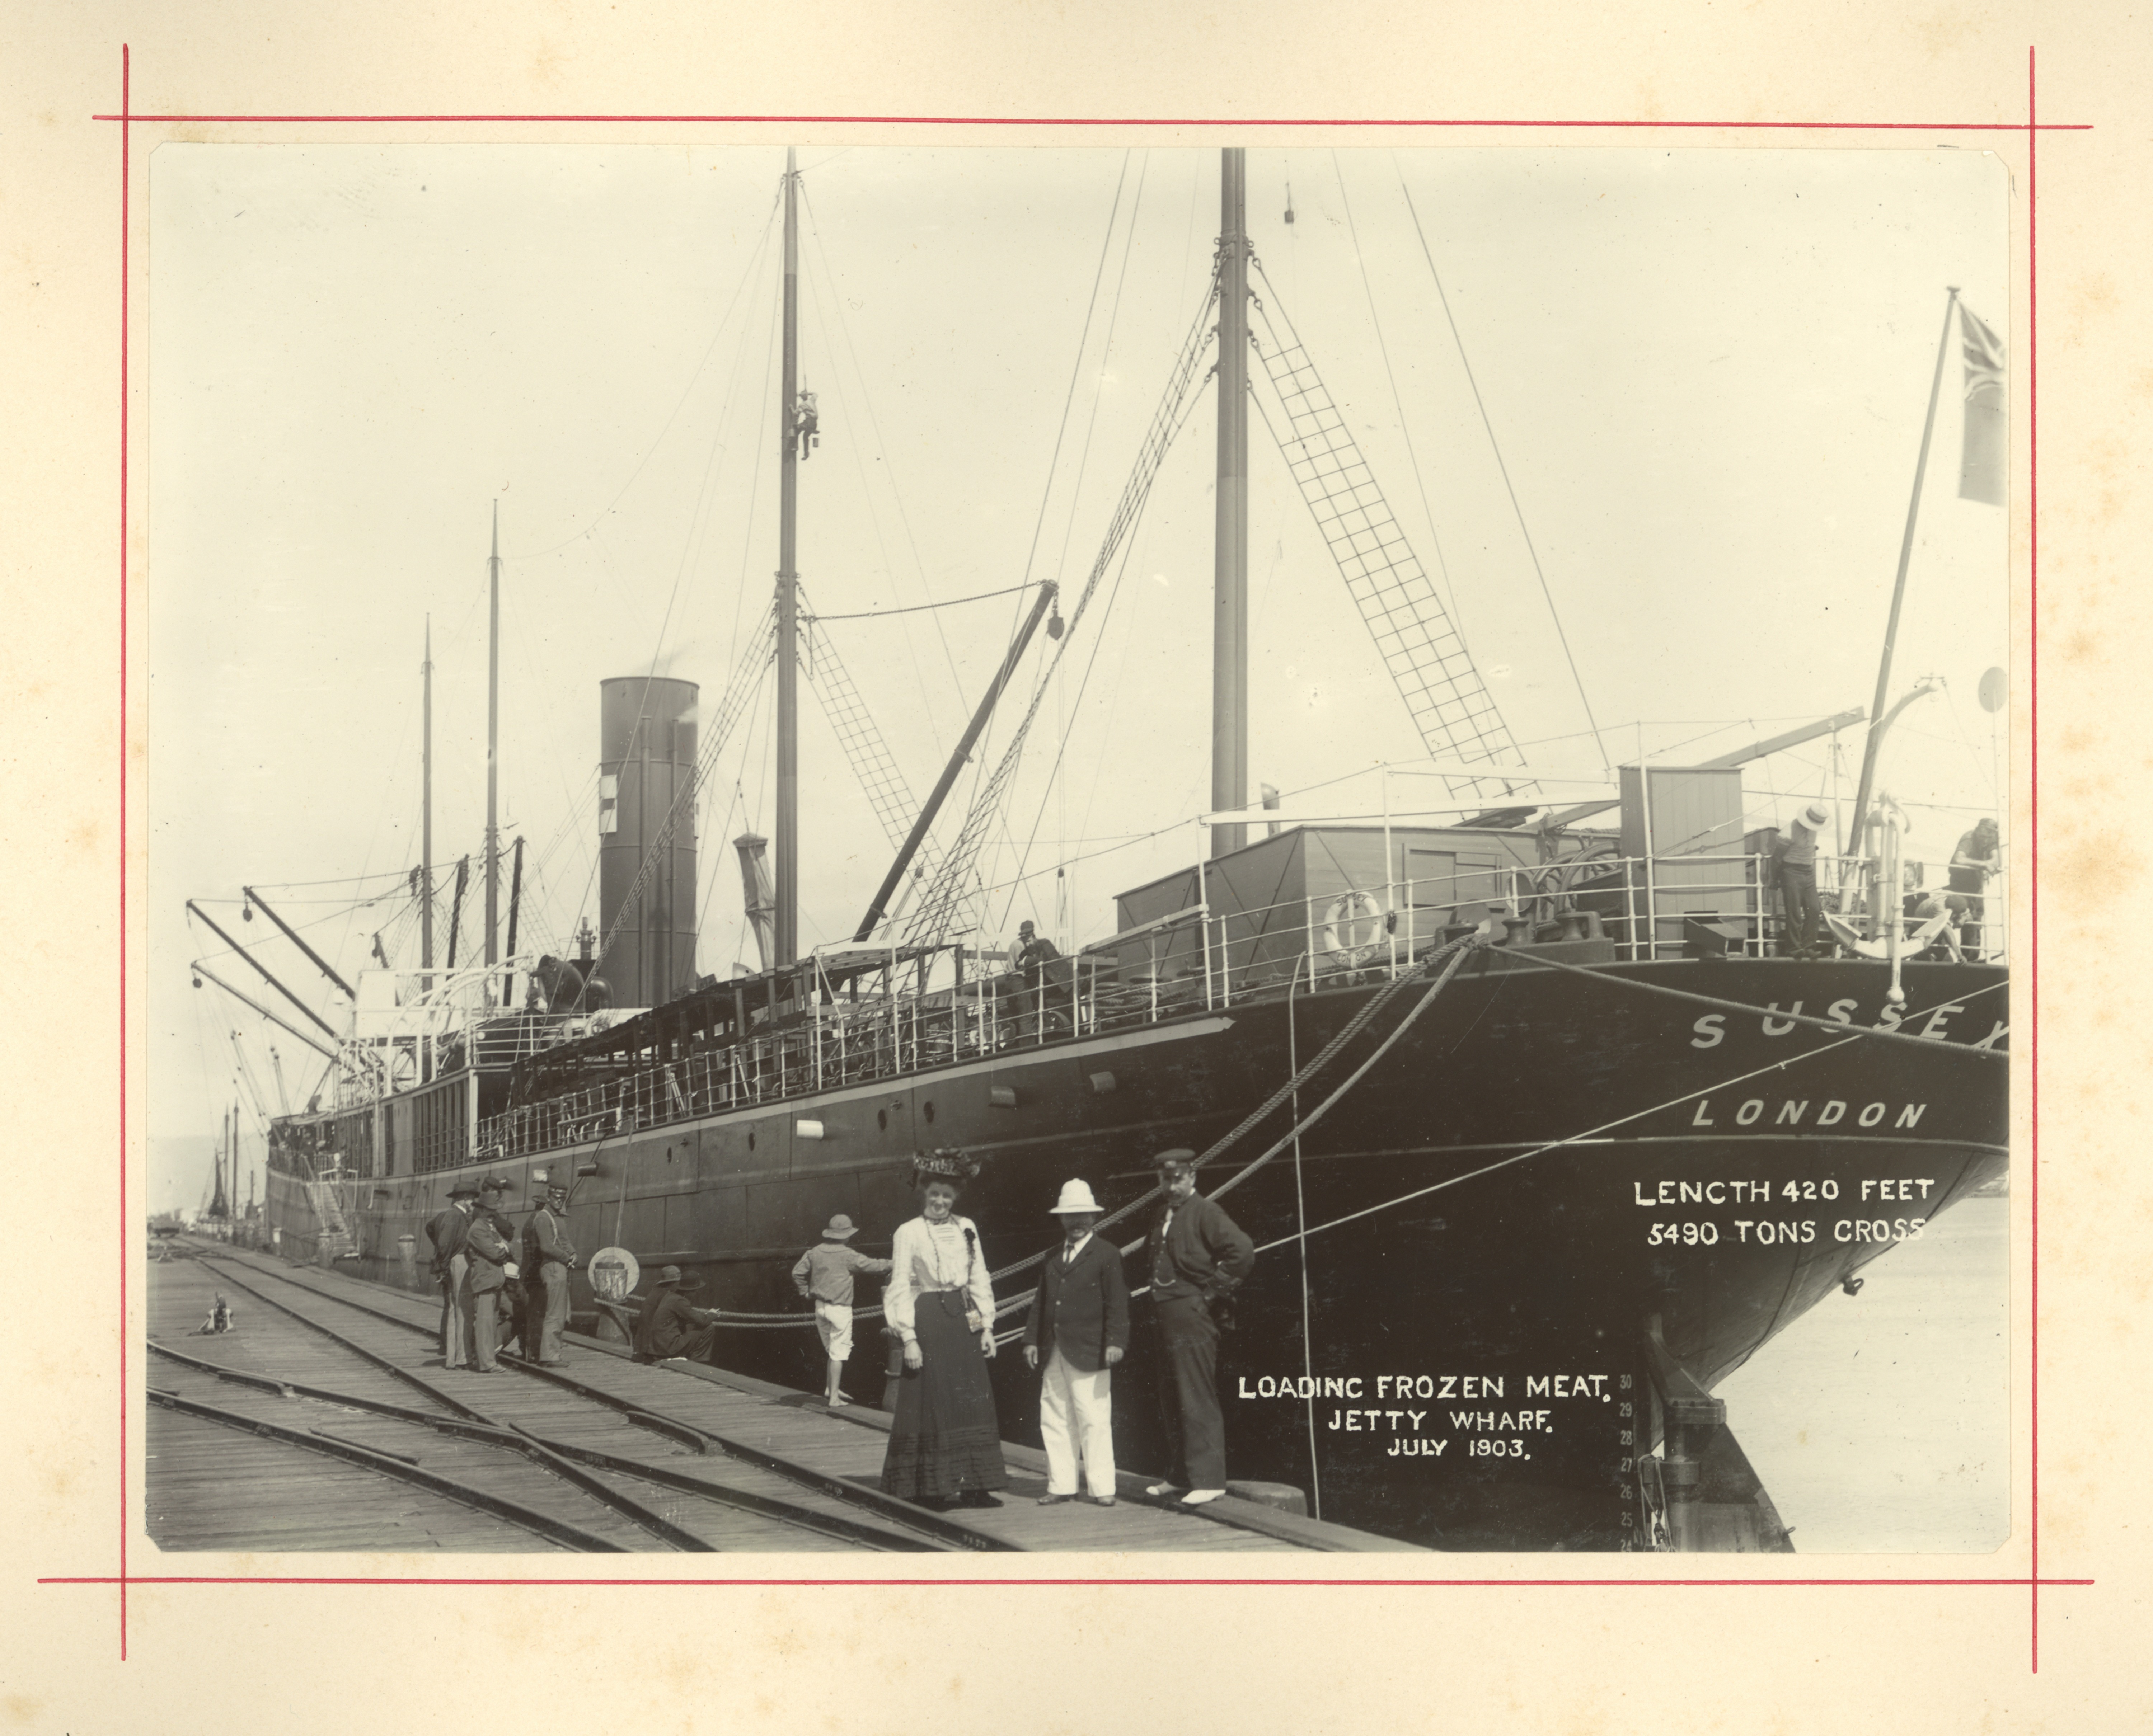 Sussex berthed at Townsville's Jetty Wharf, 1903